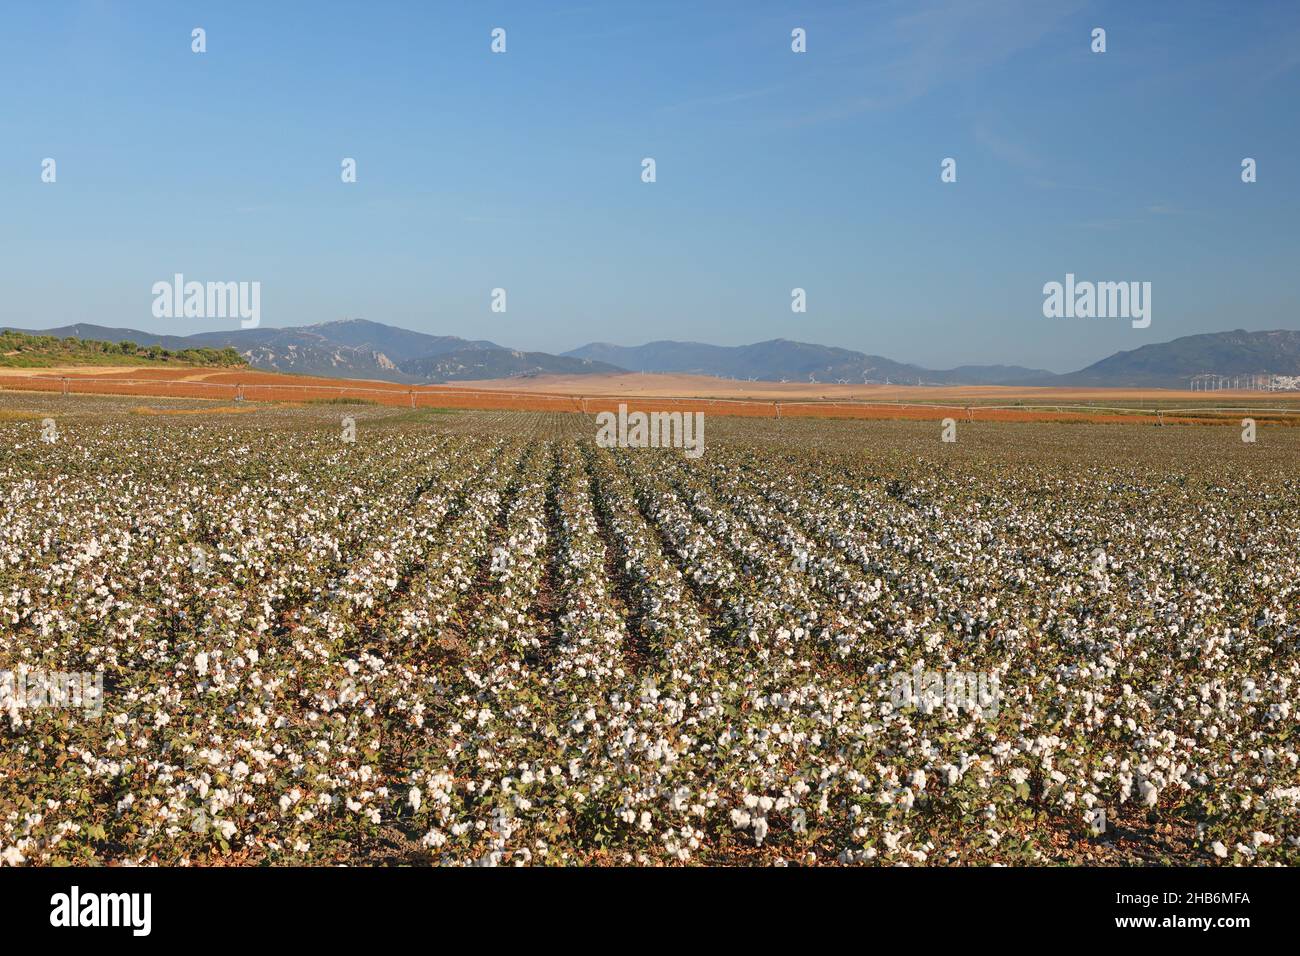 cotton (Gossypium barbadense), cotton field with fully ripe and opened capsule fruits, mountain range in the background, Spain, Andalusia, Tarifa, La Stock Photo